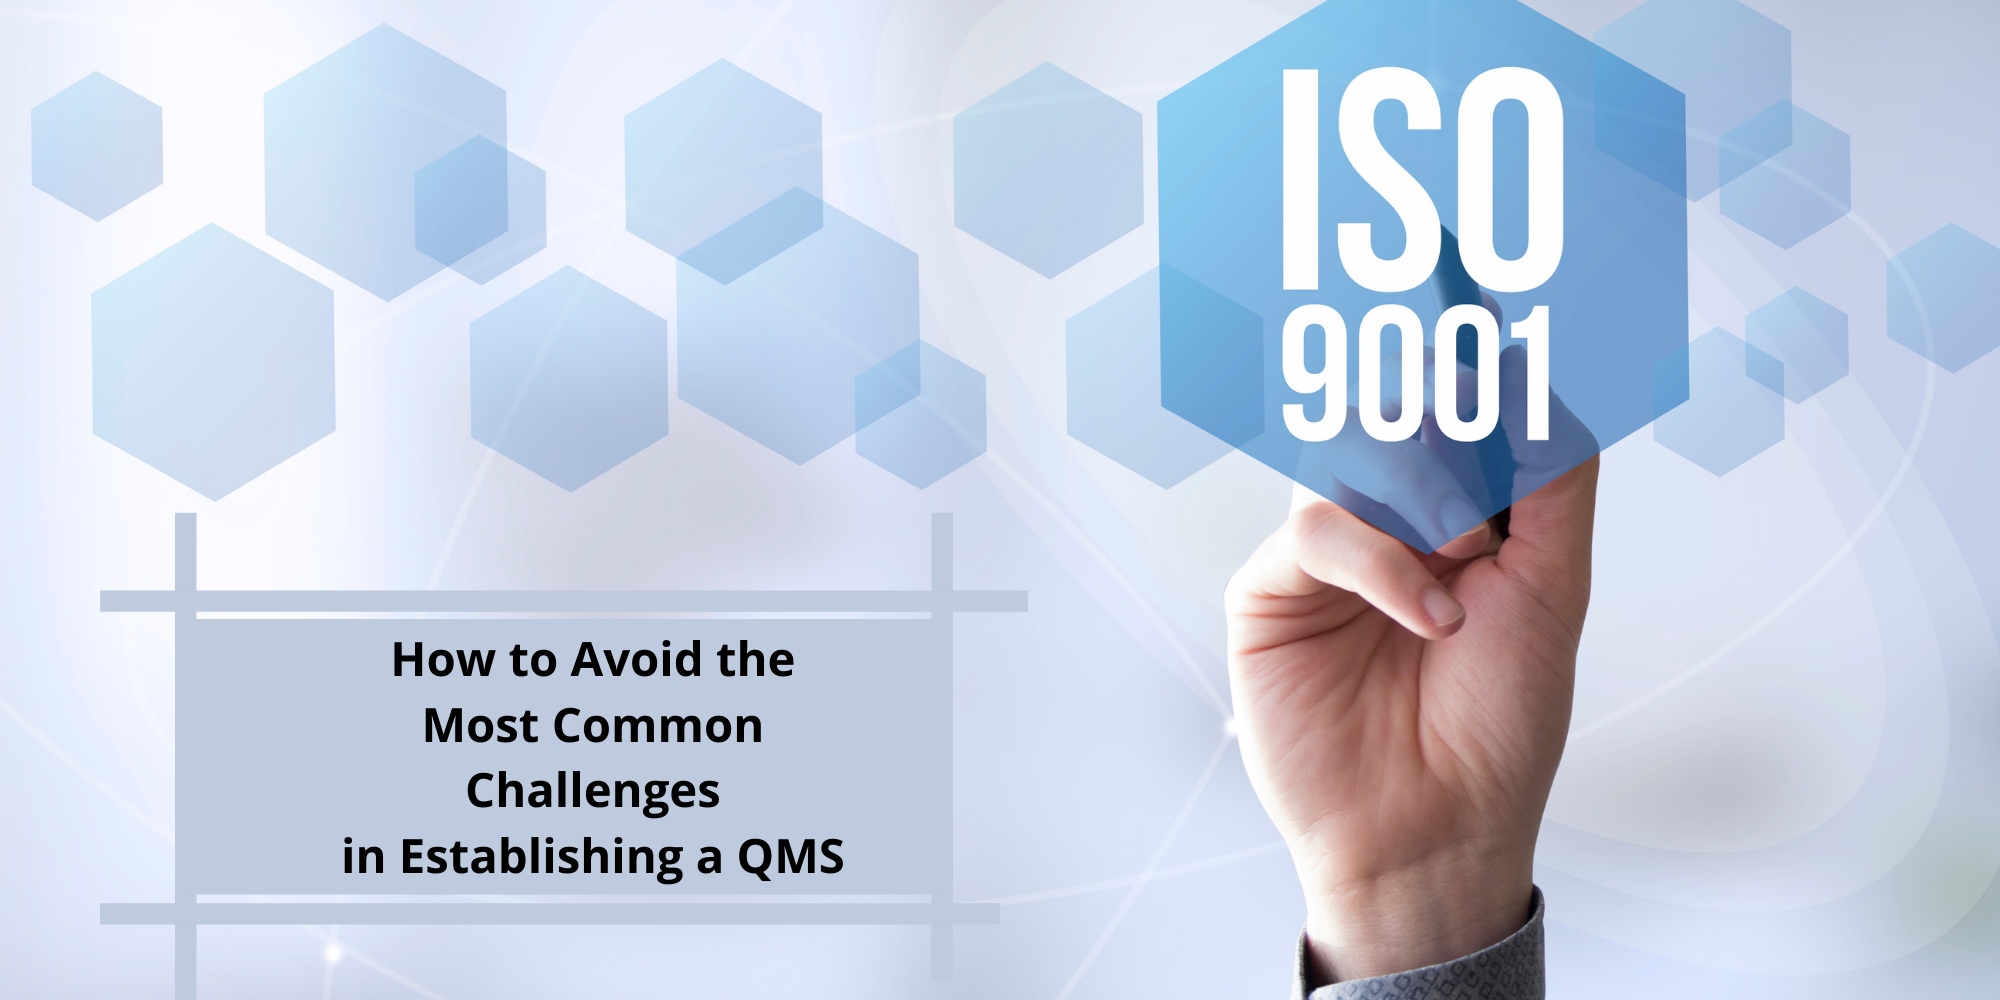 How to Avoid the Most Common Challenges in Establishing a QMS